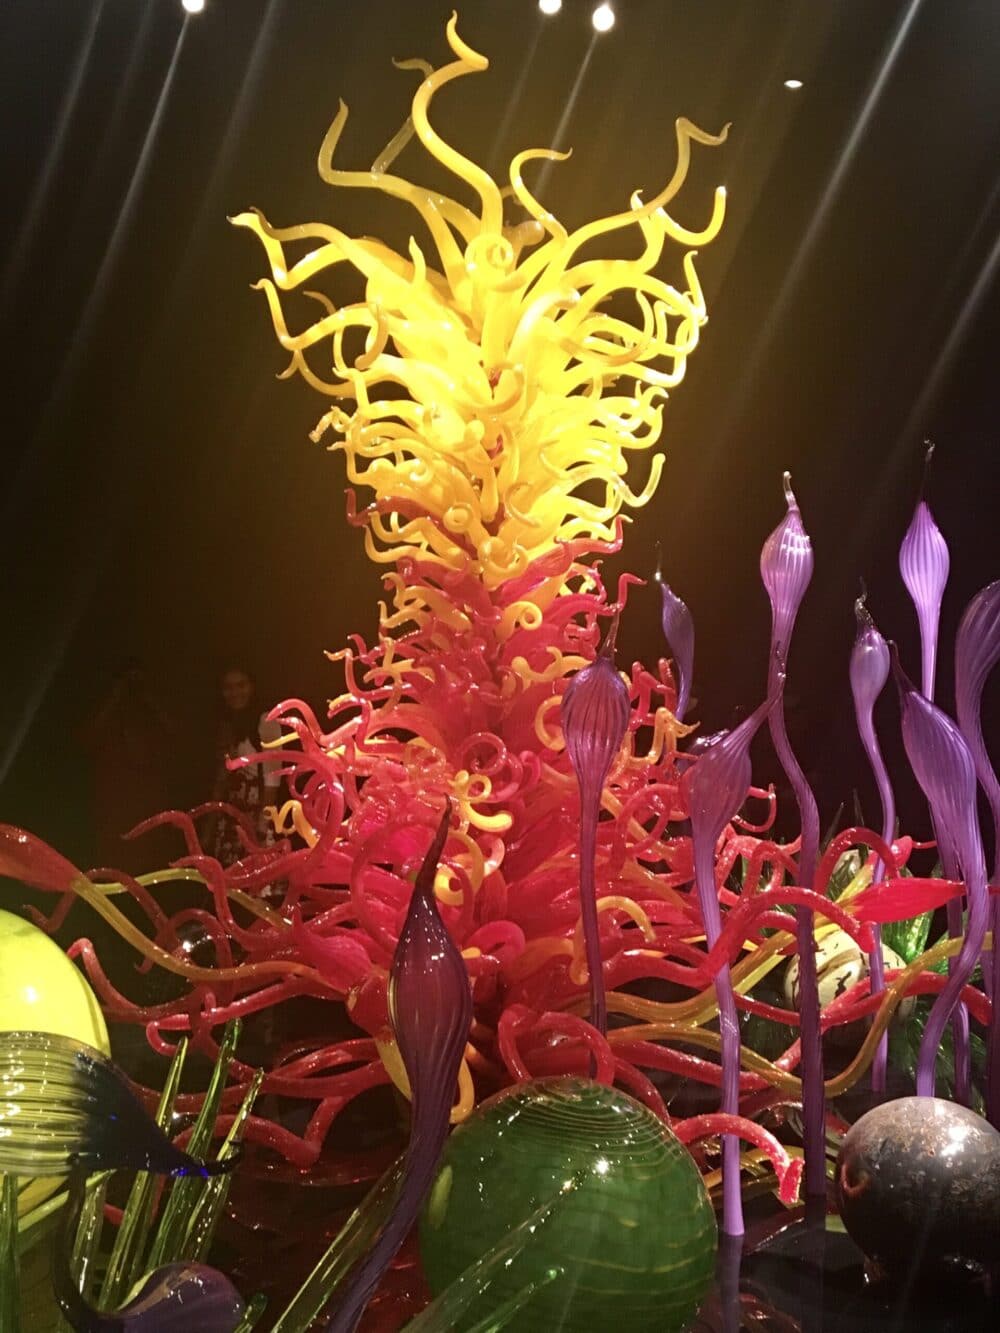 Chihuly Garden and Glass Museum in Seattle